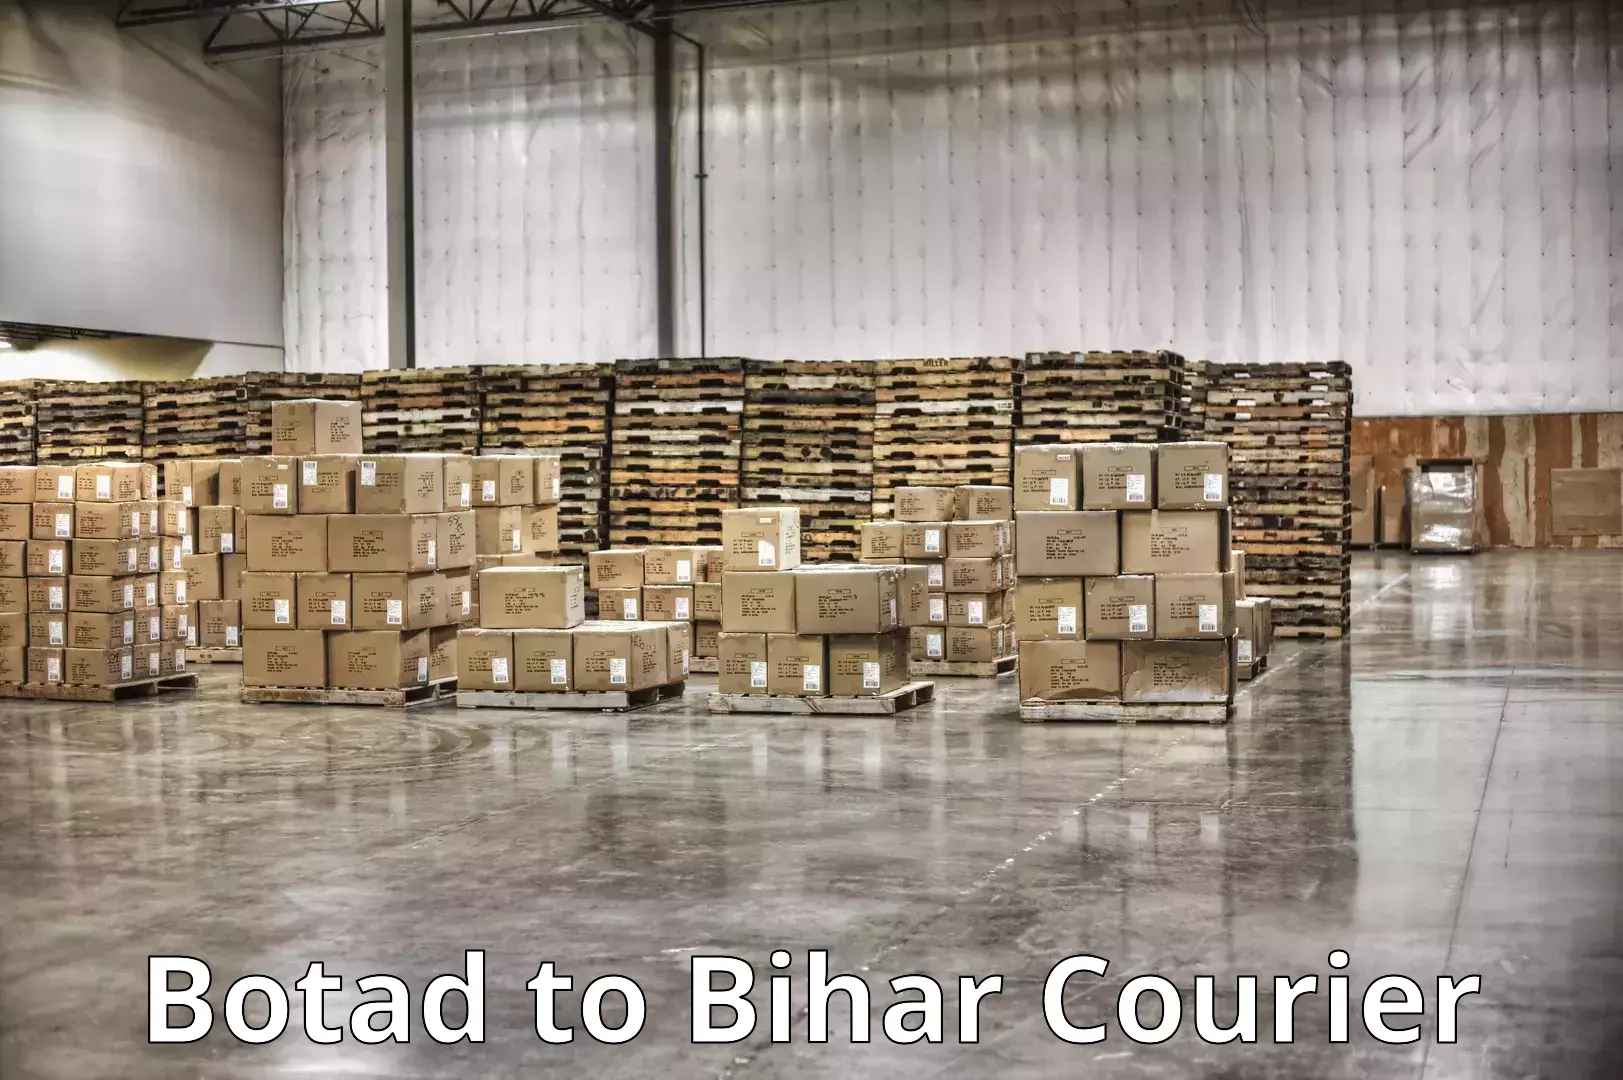 Furniture delivery service Botad to Bihar